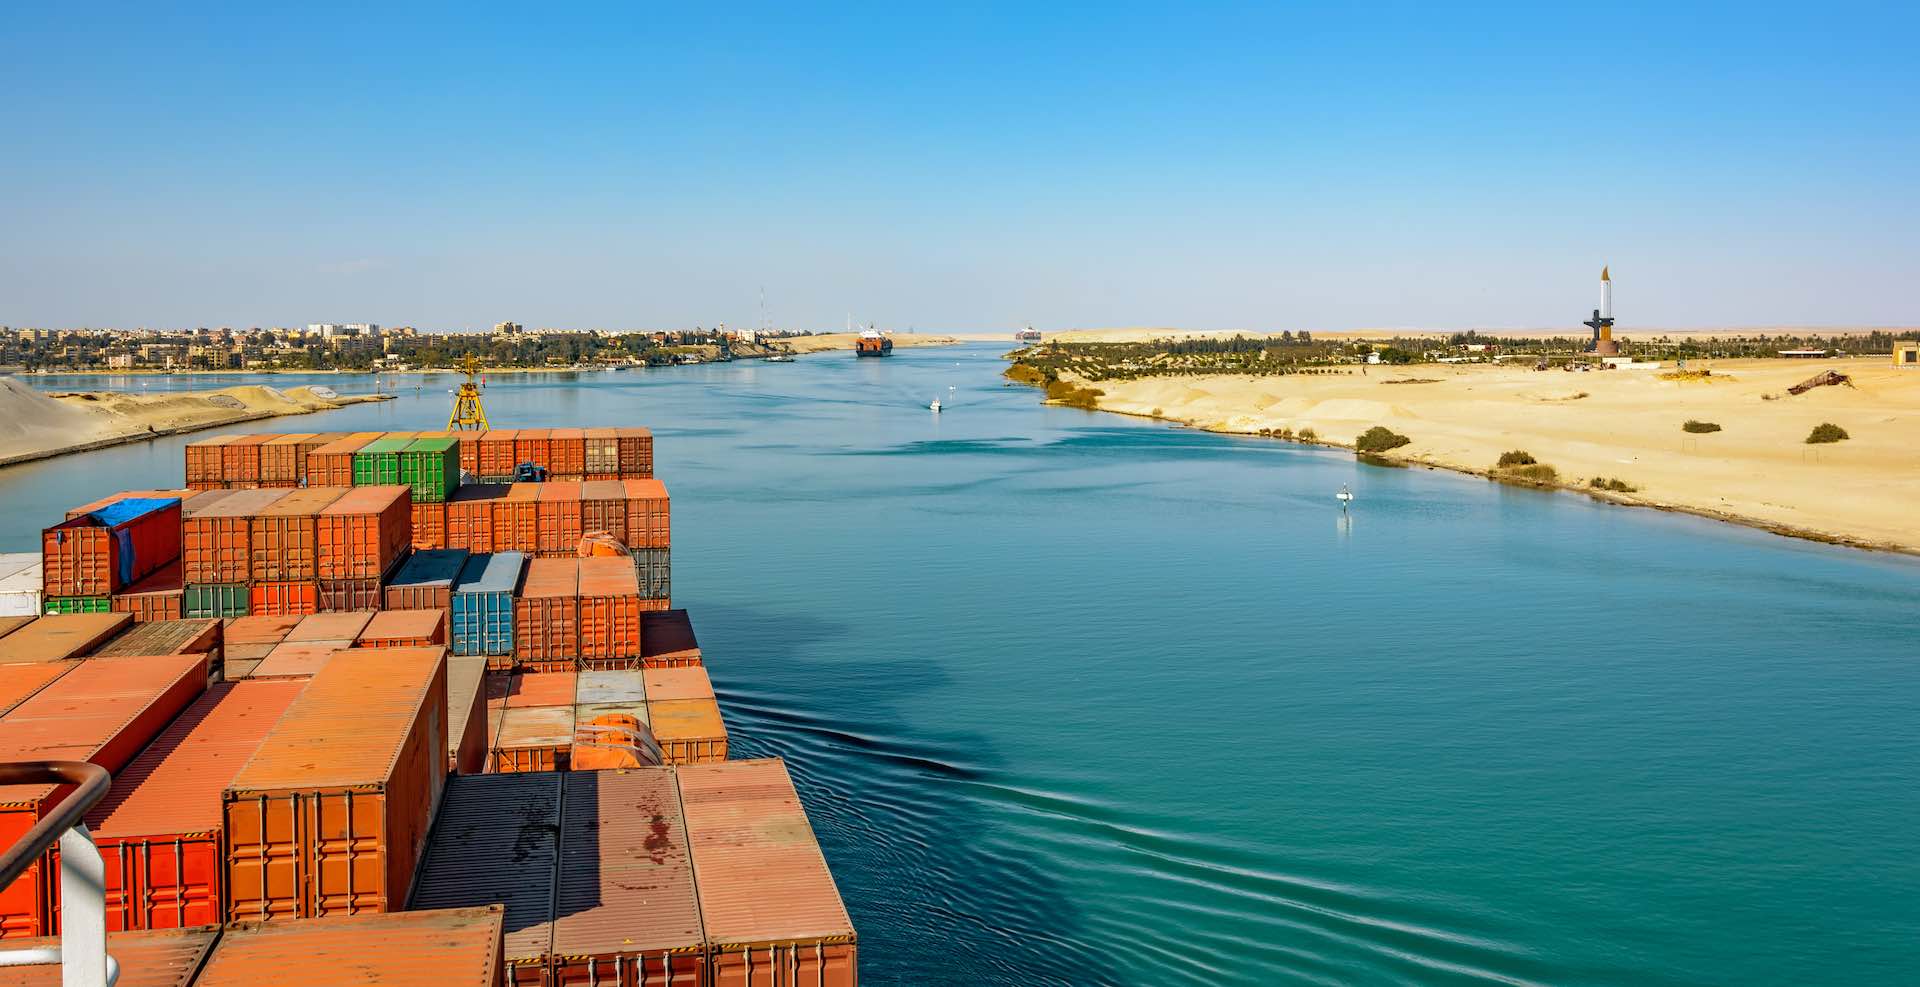 Suez Canal revenue hits highest record at $704 million in July 2022